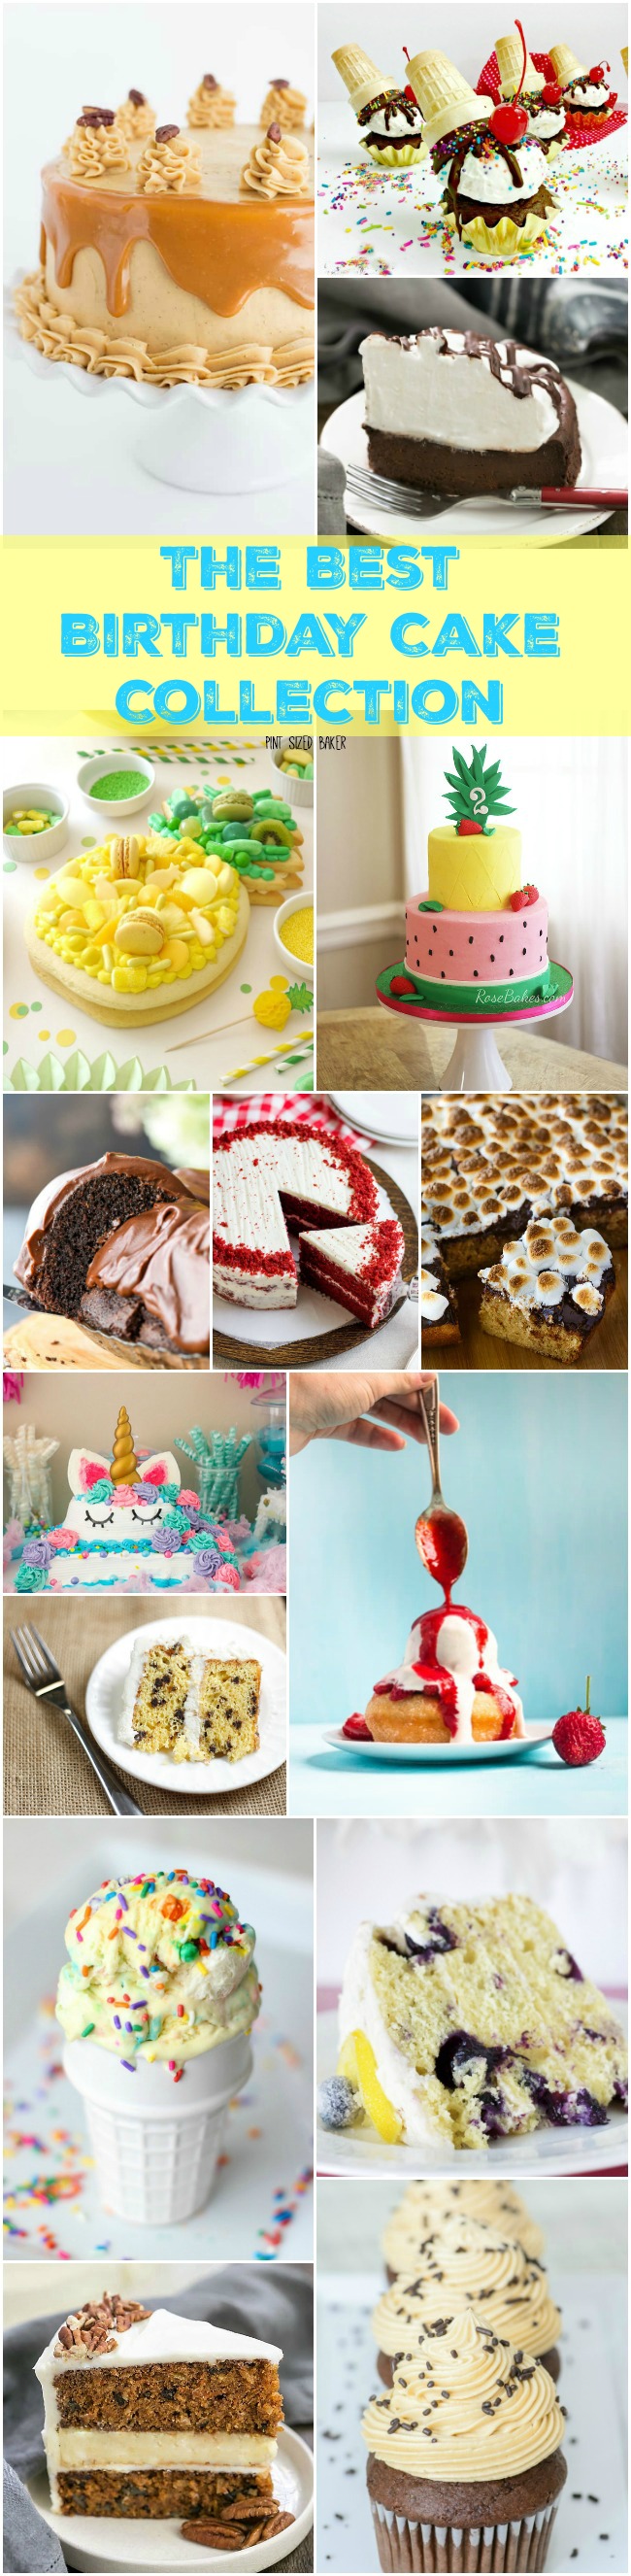 Everyone loves birthdays! I've put together The Best Birthday Cake Collection and I'm loving each and every cake, cupcake, and ice cream treat.